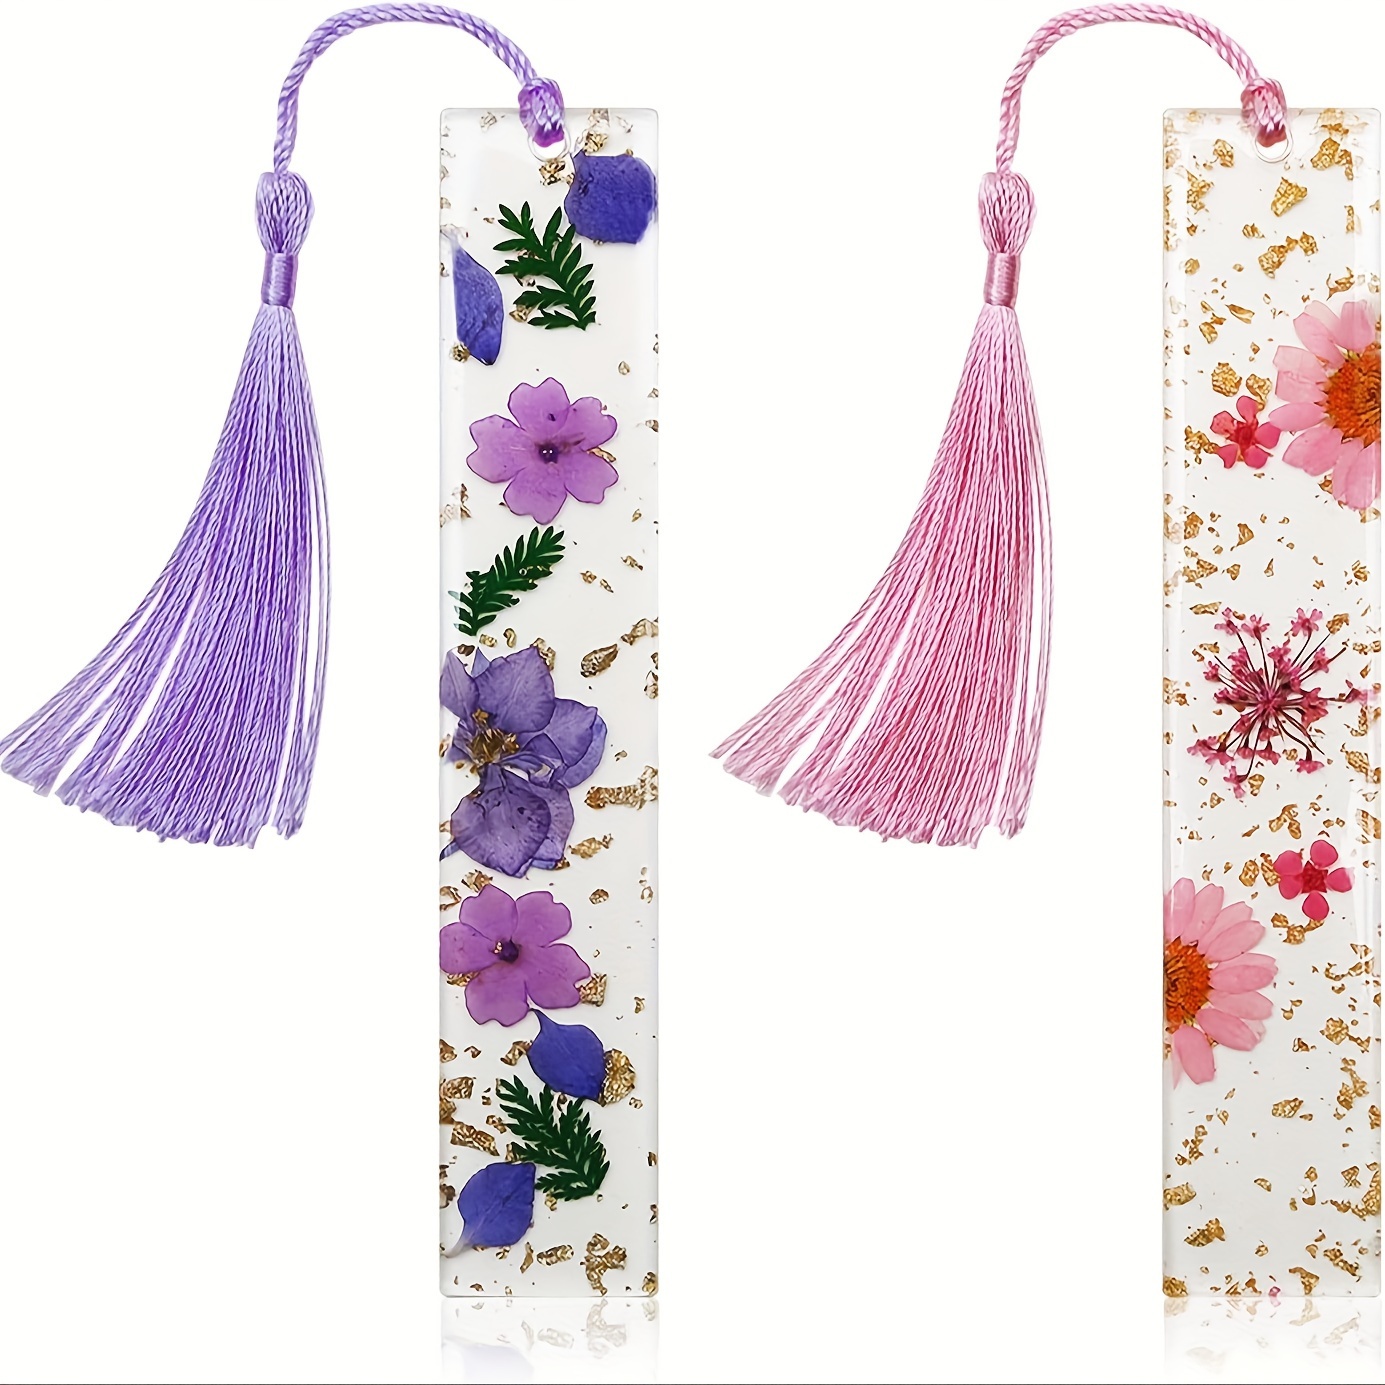 DIY Transparent Dried Flower Bookmark Making Kit Include Bookmarks Dried  Flowers Colorful Tassels and Tweezer Handmade Dried Floral Bookmark for